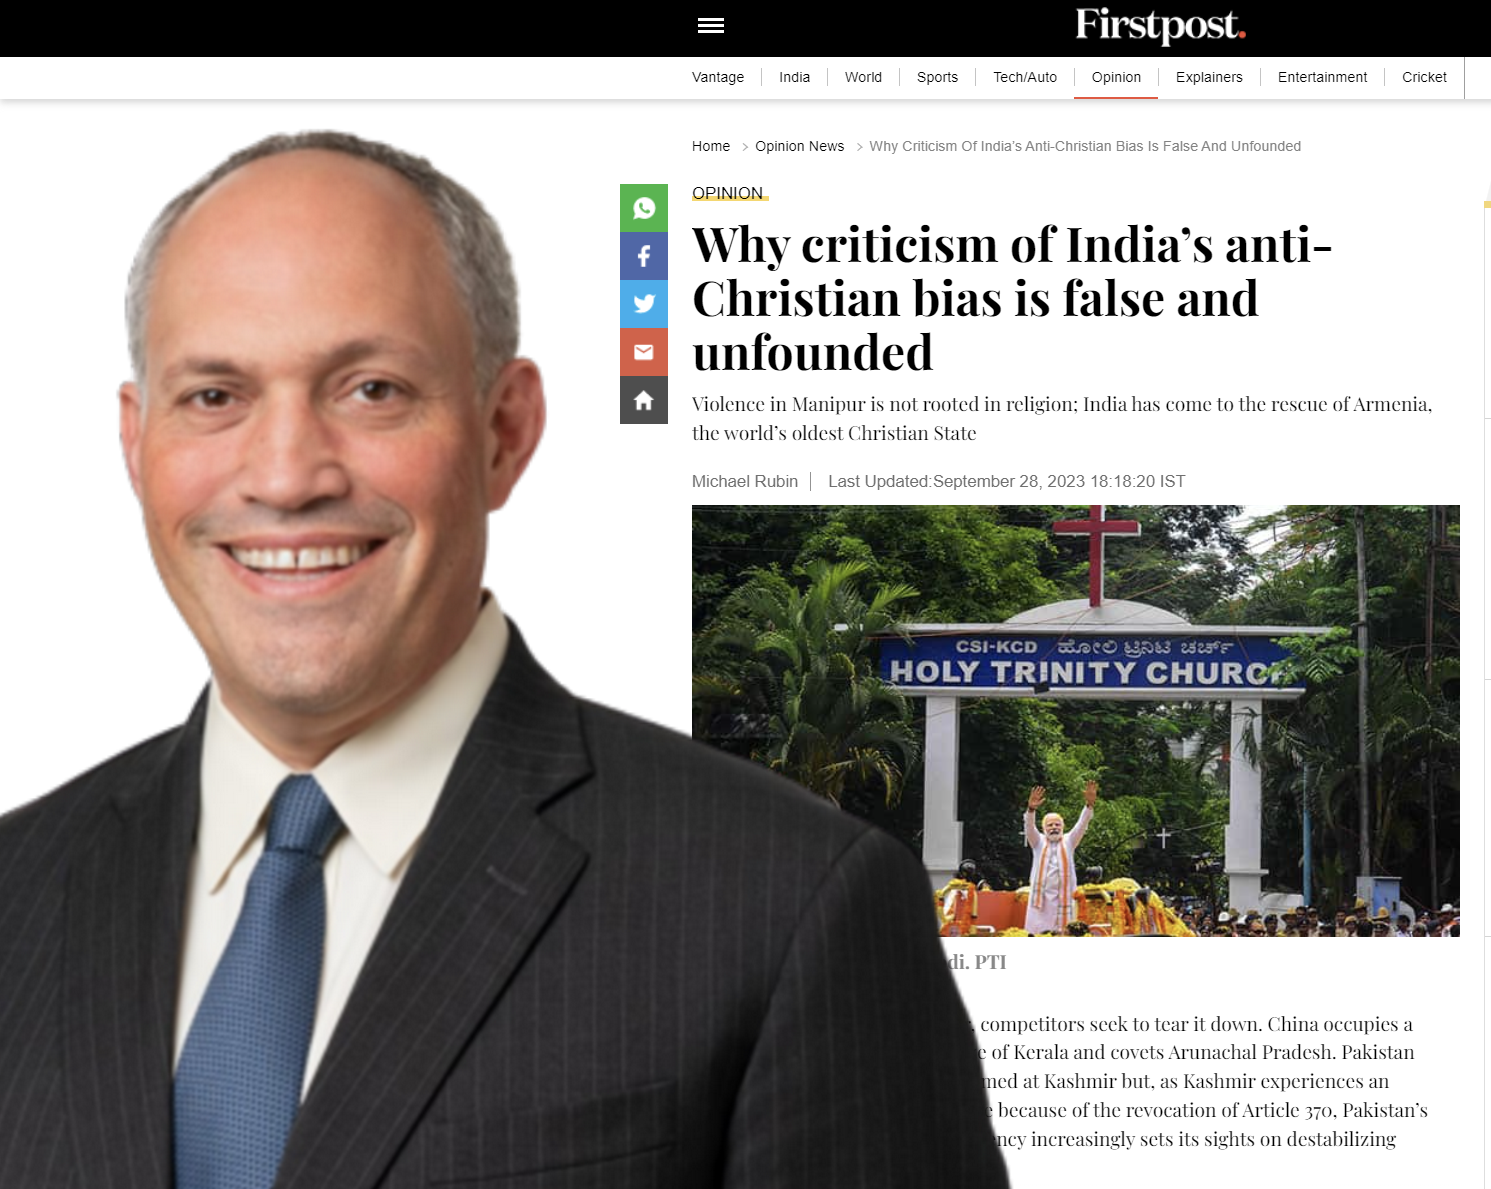 Michael Rubin: Why Criticism of India’s Anti-Christian Bias Is False and Unfounded